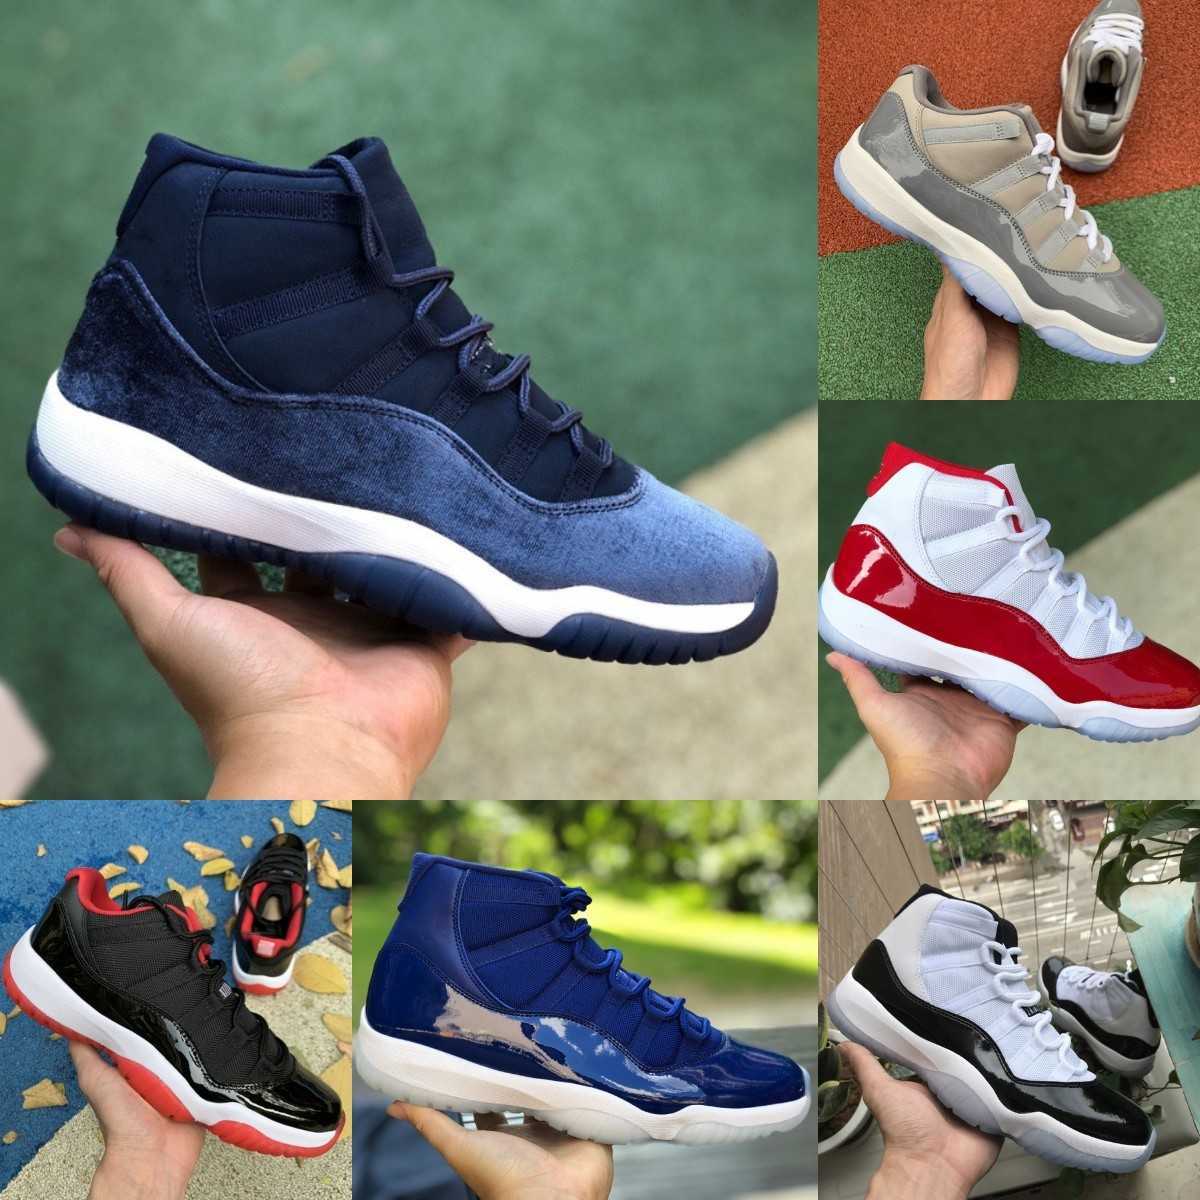 

Jumpman 11 Easter Retro Basketball Shoes Men 11s Cherry Cool Grey Midnight Navy Jubilee 25th Anniversary Concord Bred Low Legend Mens Women Trainers Sports Sneakers, Ask the seller about some sizes